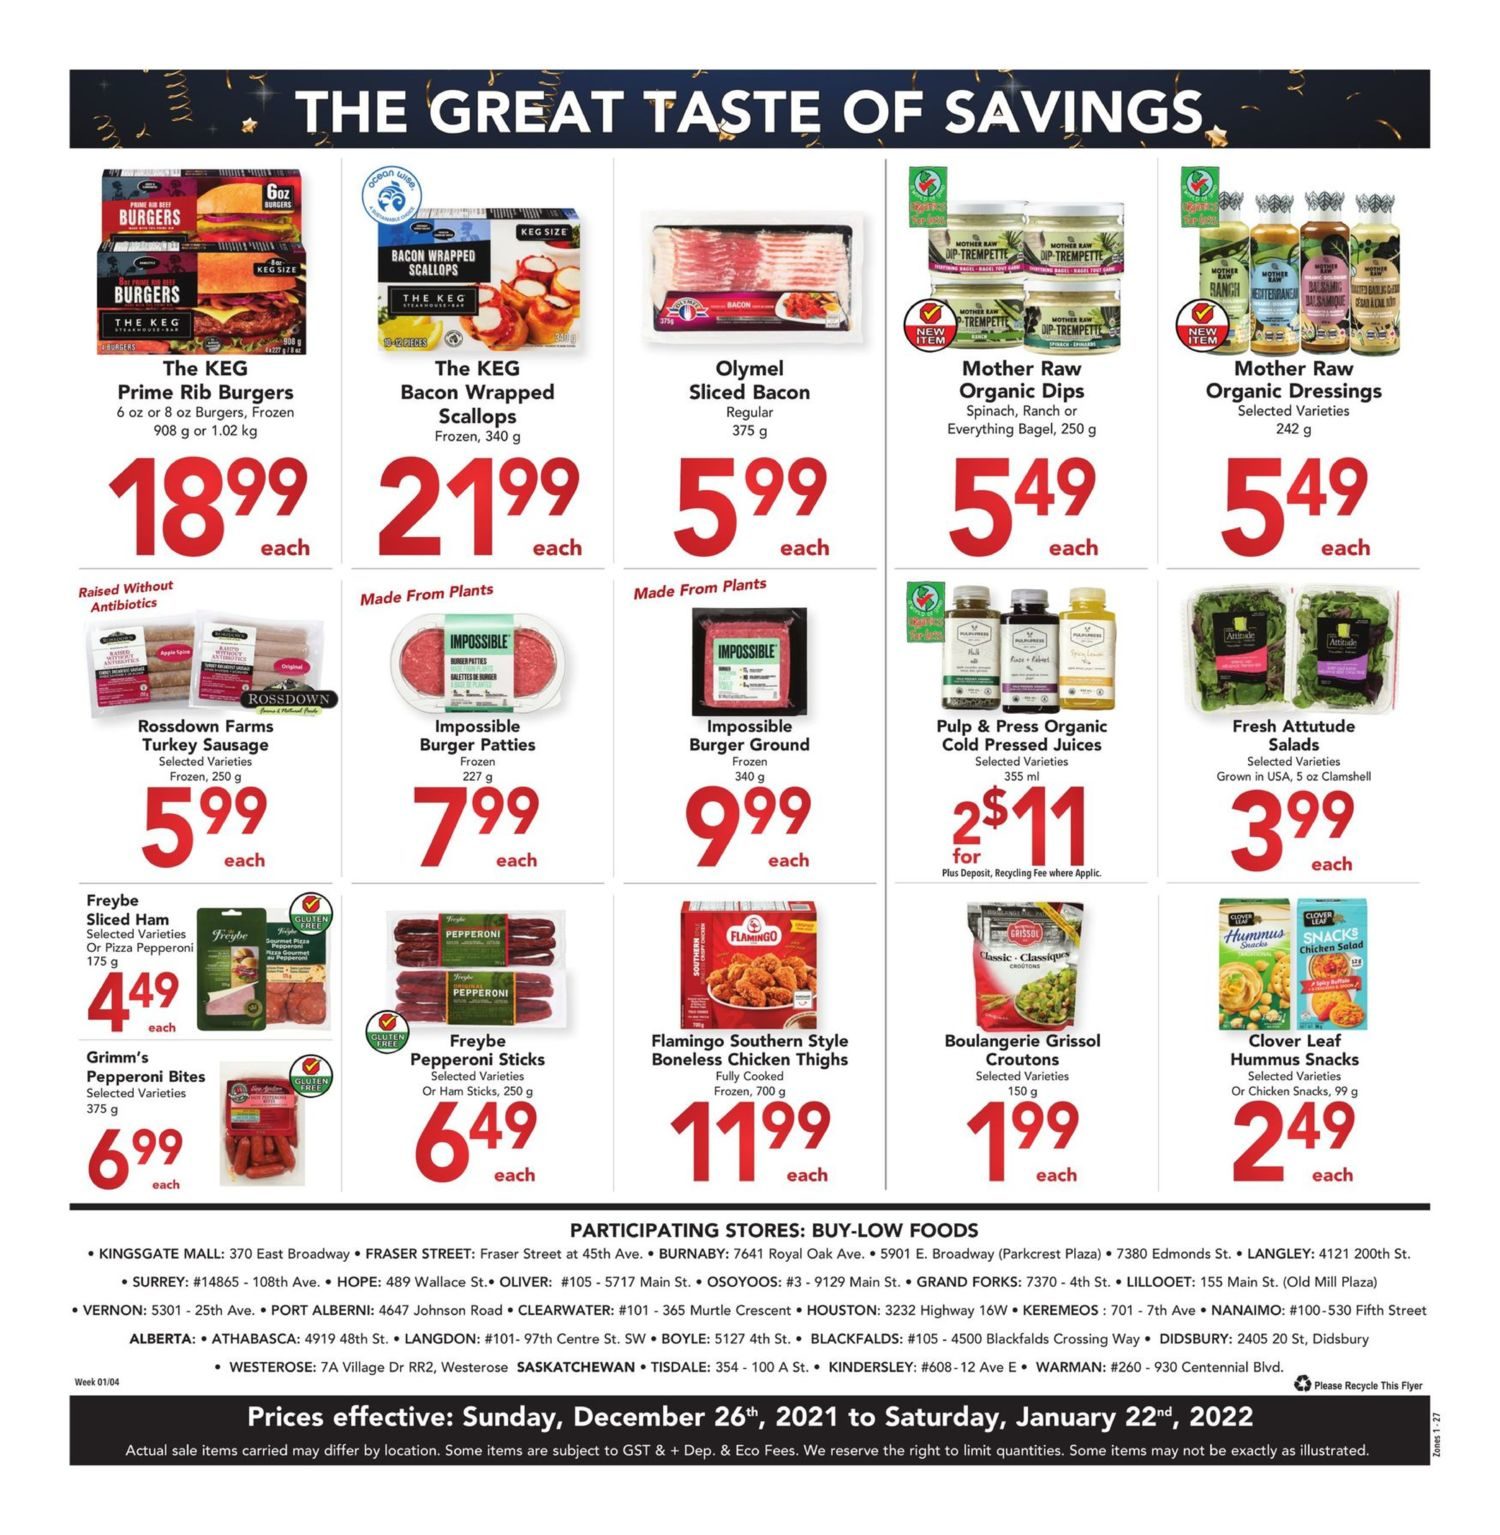 Buy-Low Foods - Budget Savers - Page 8